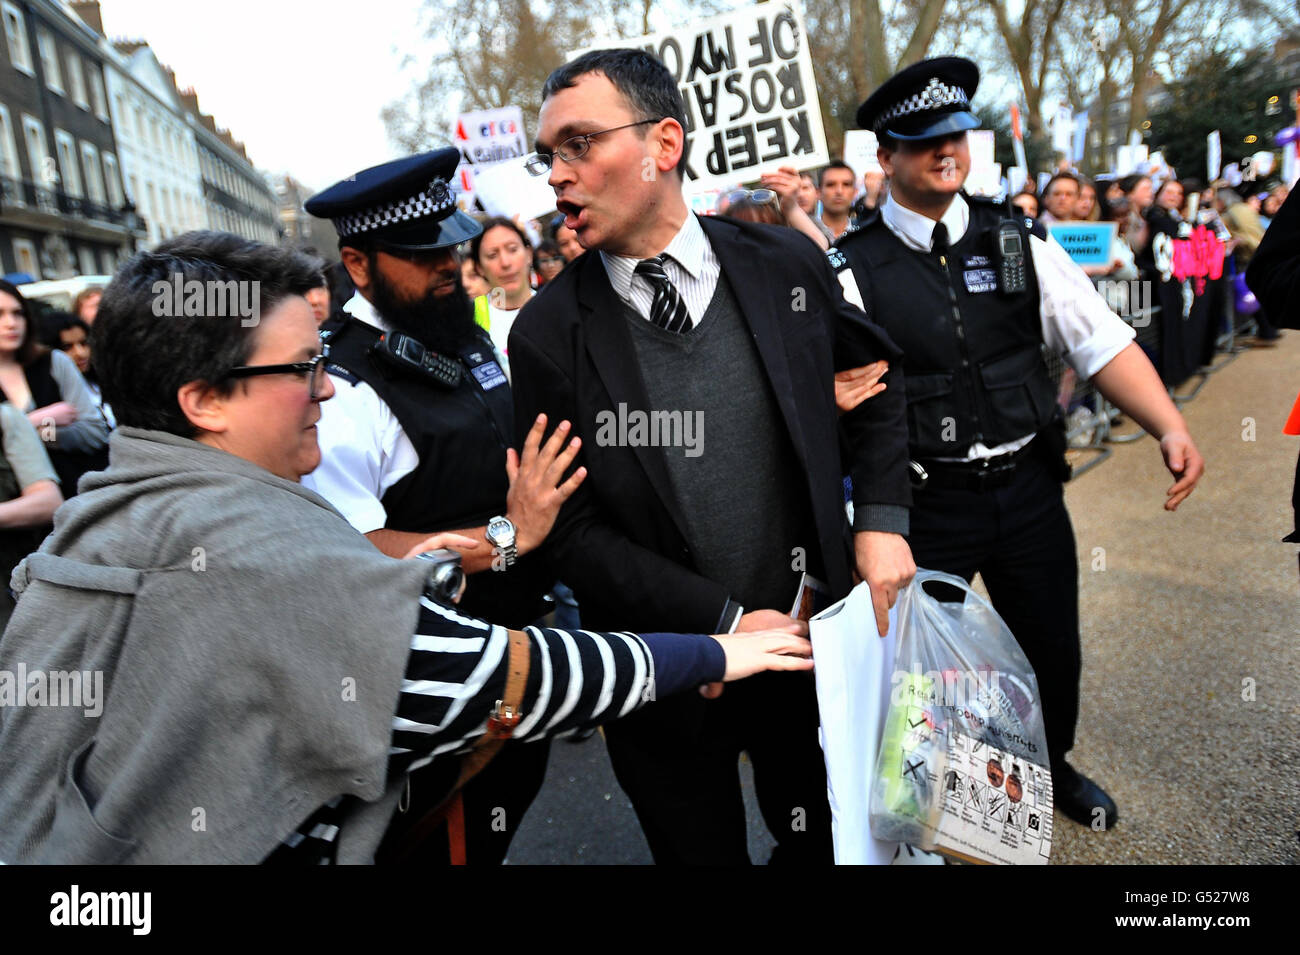 Police intervene as a woman grabs an anti-abortion poster from a man taking part in a anti-abortion vigil in Bedford Square, London. Stock Photo